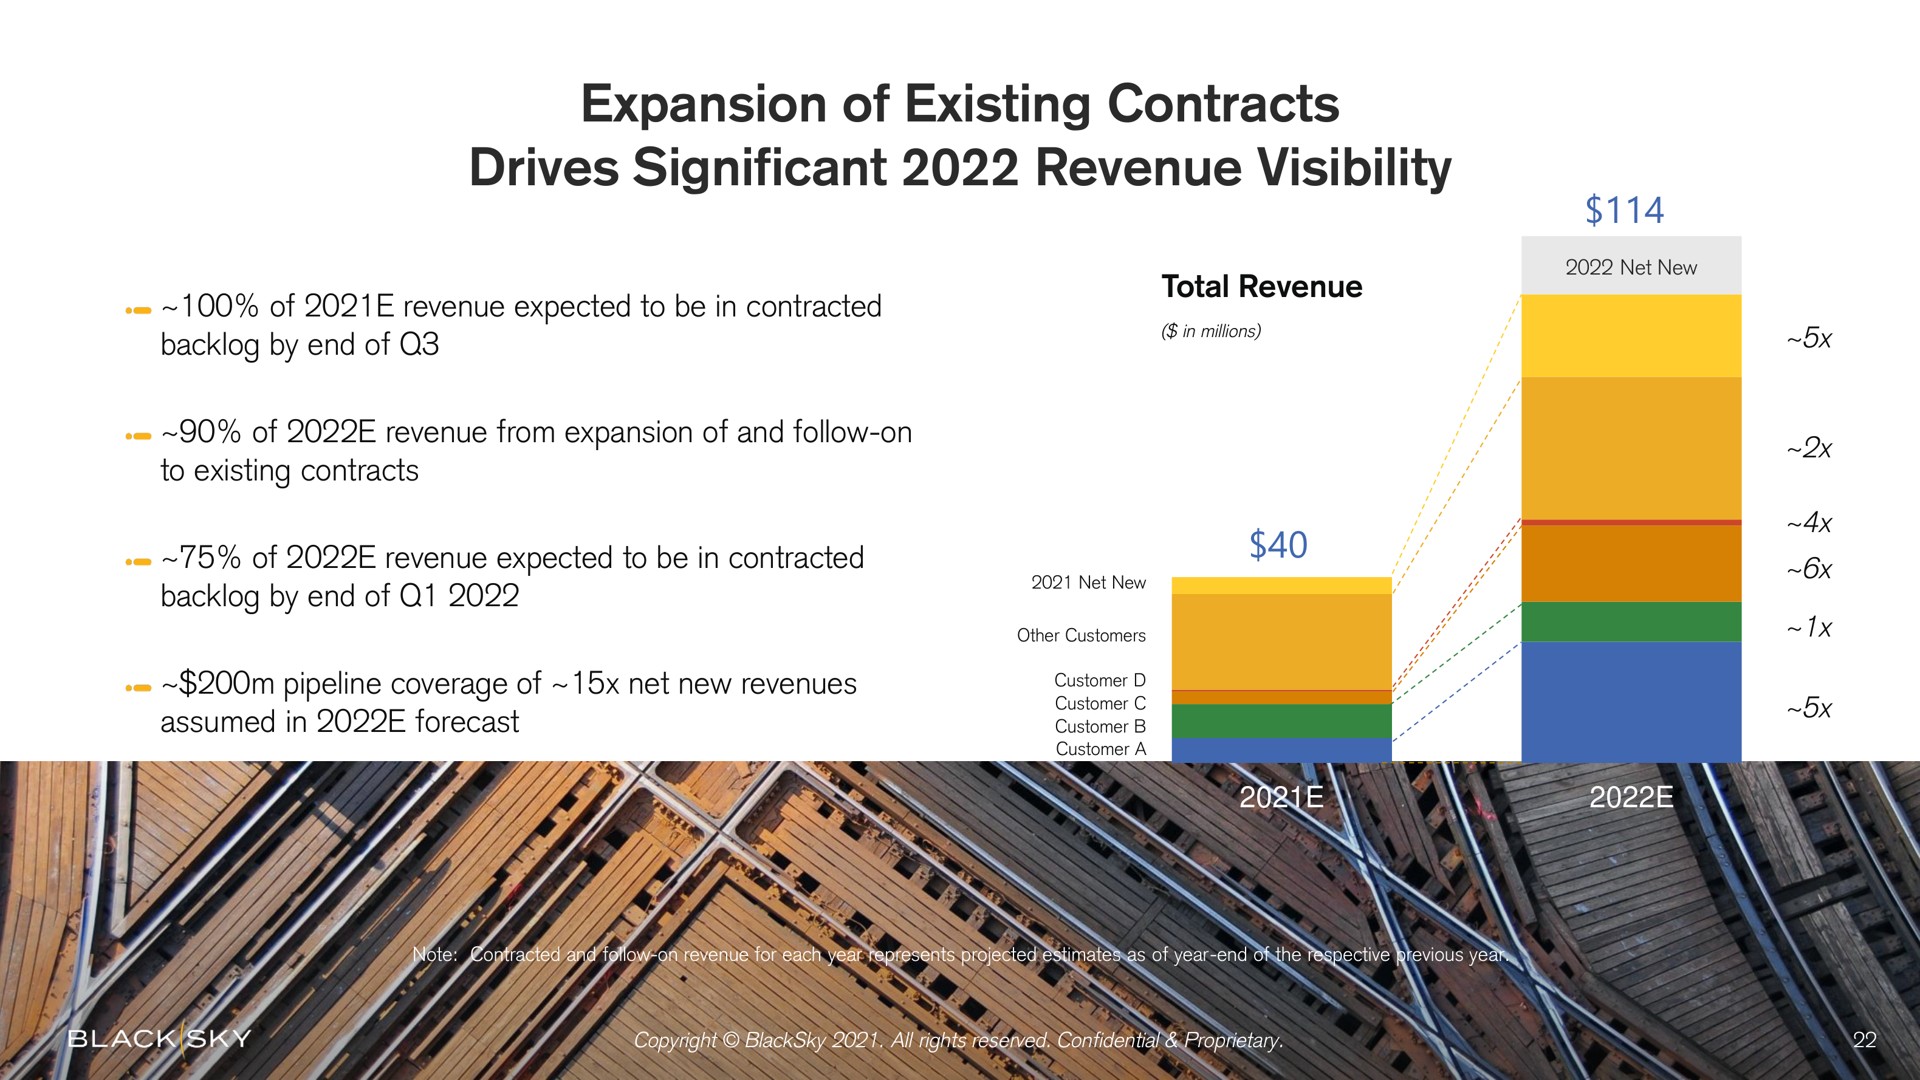 expansion of existing contracts drives significant revenue visibility | BlackSky